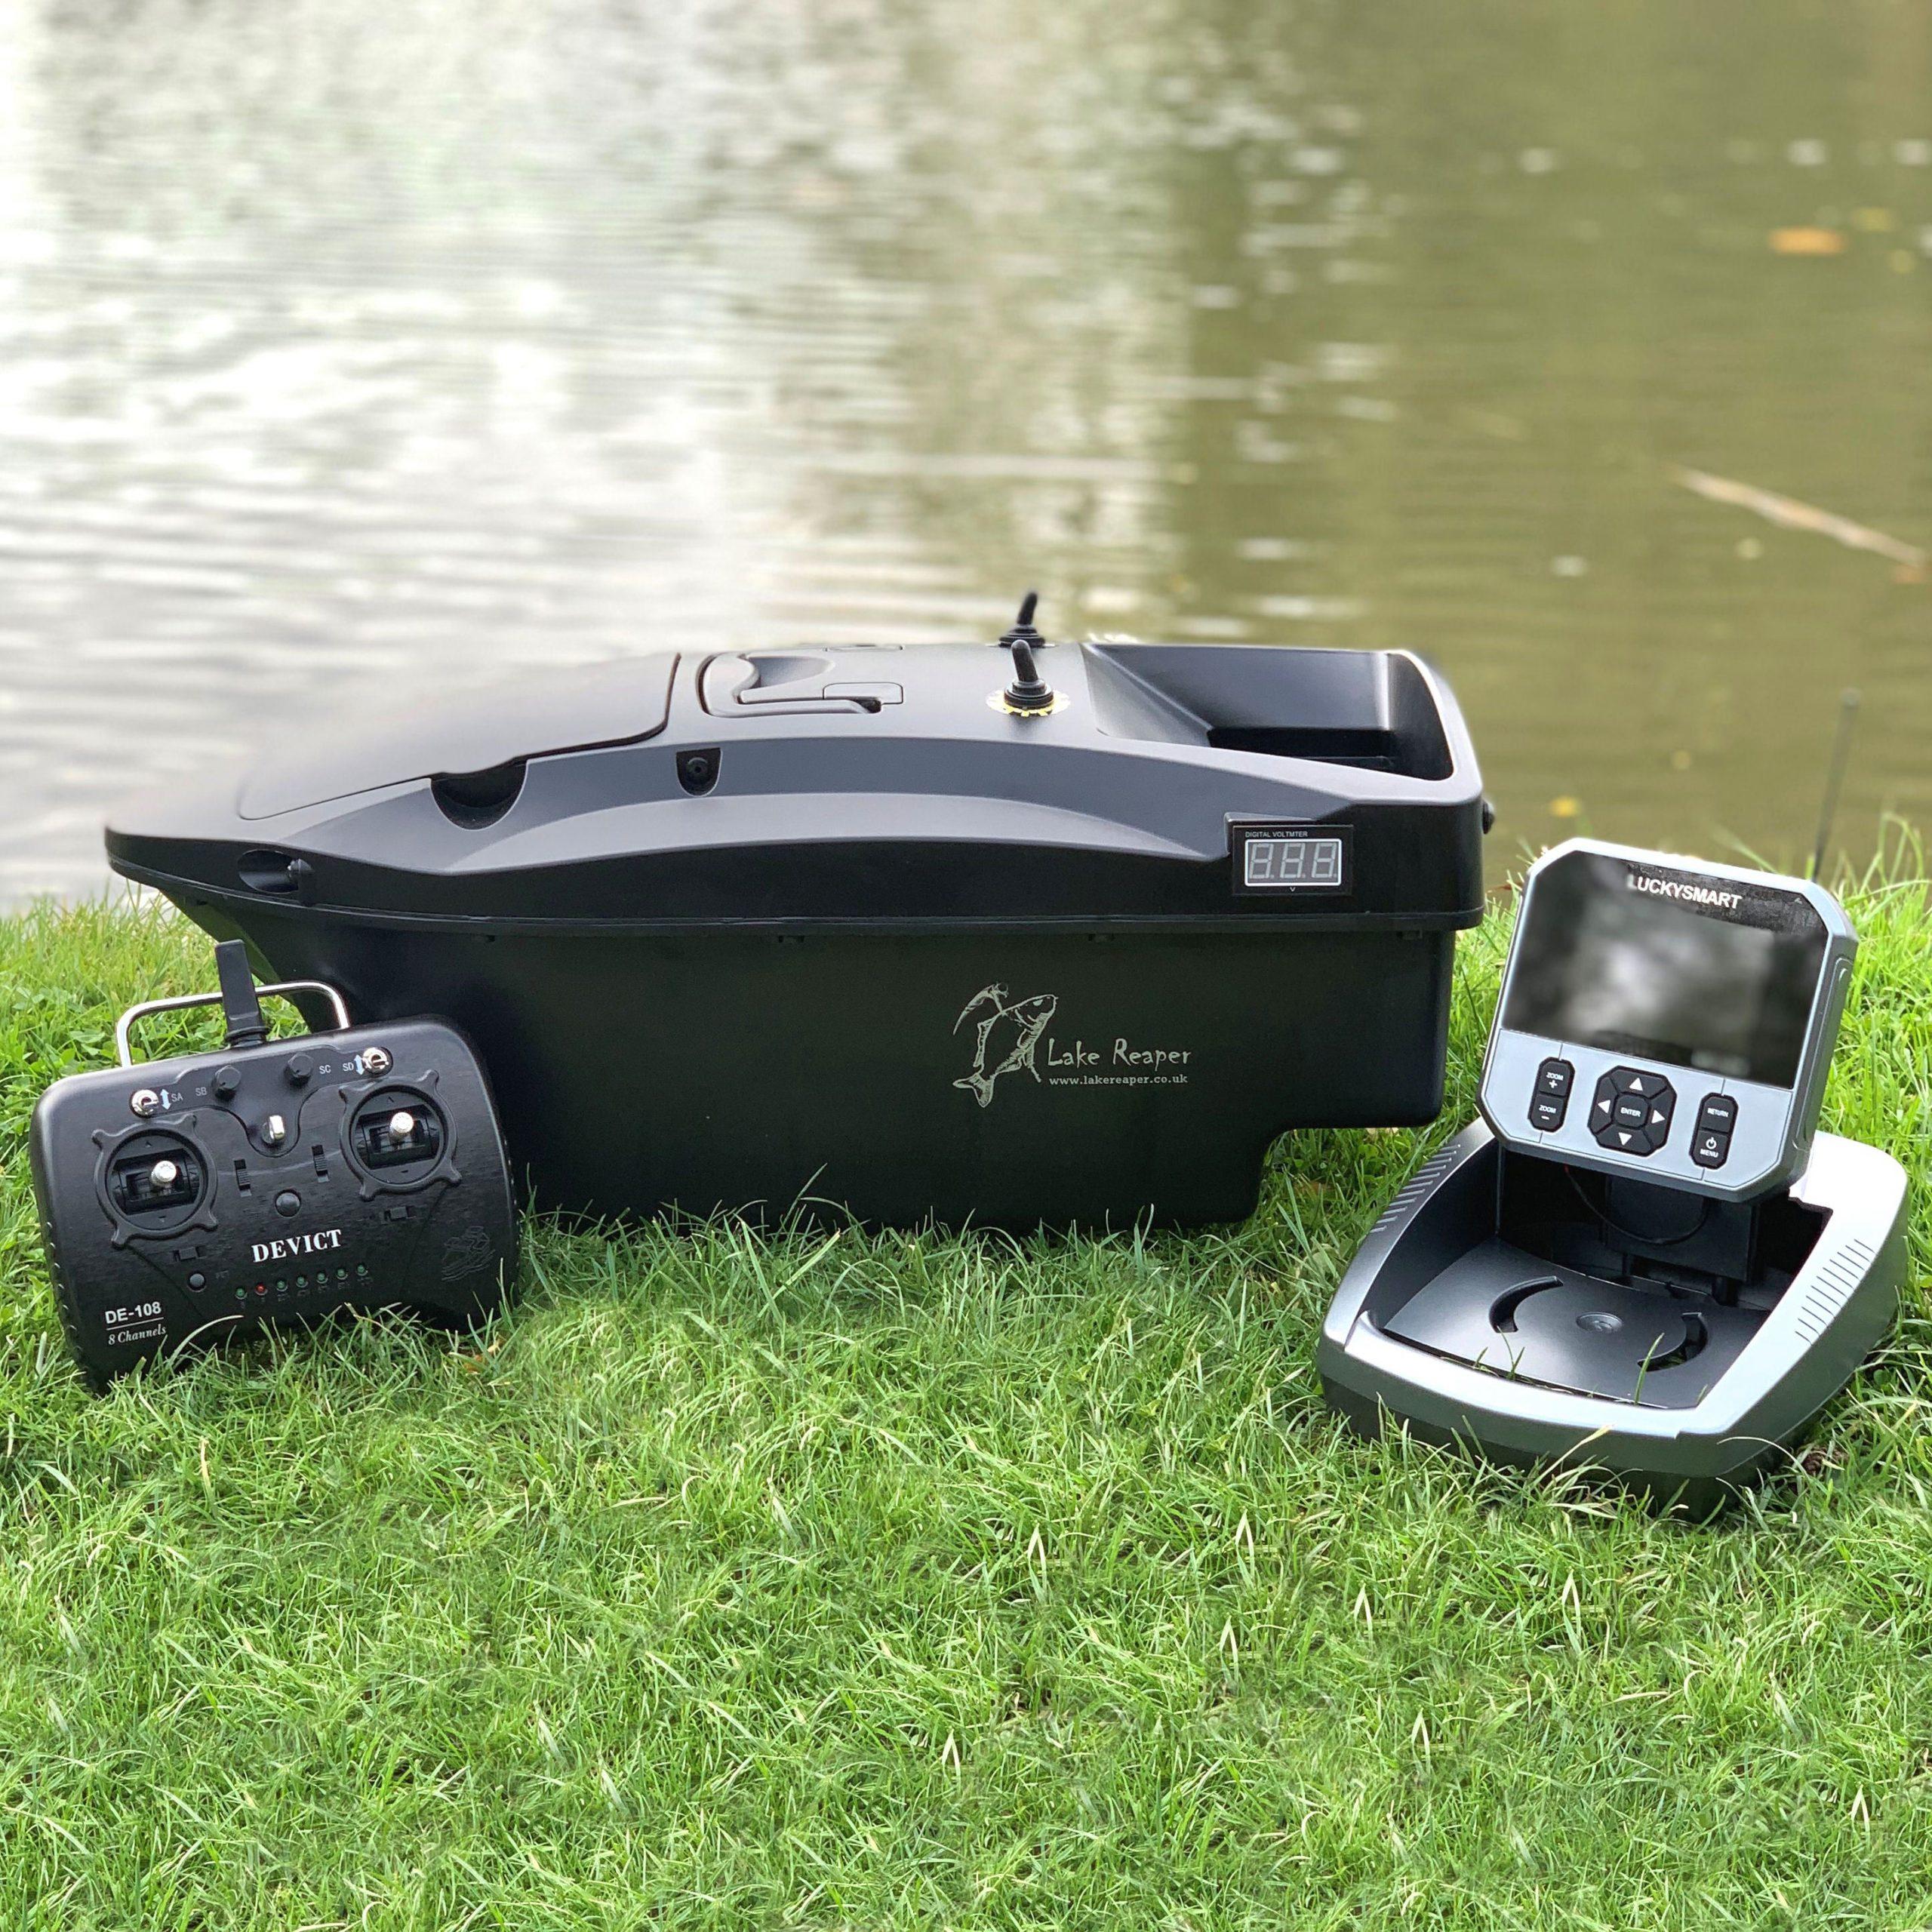 Bait Boat With Fish Finder: Top Bait Boat Models with Fish Finder: Features and Reviews